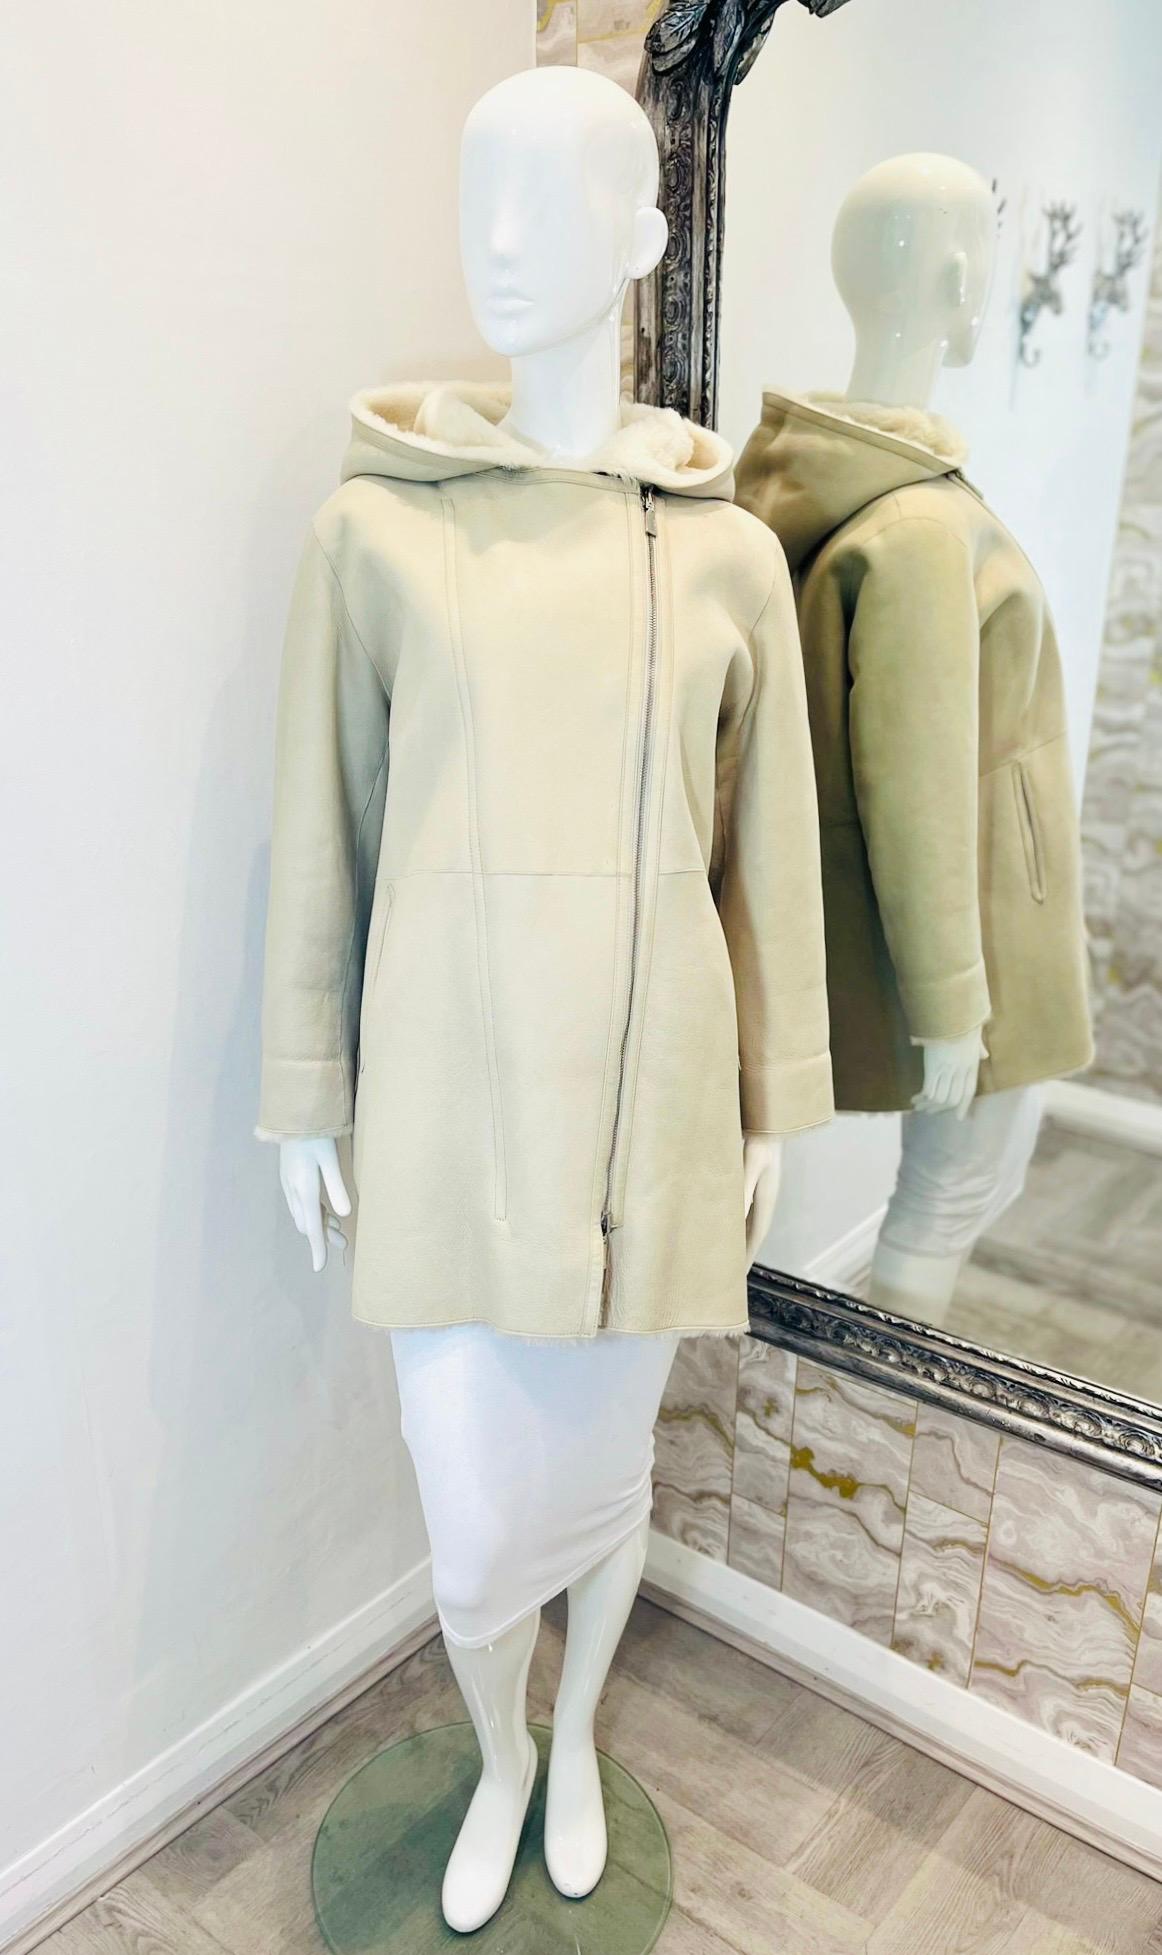 Max & Moi Reversible Merino Shearling Coat

Ivory, longline coat designed to be worn either on the leather side, or reversed to have the plush shearling lining facing outwards.

Featuring front asymmetric zip fastening, side pockets and spacious